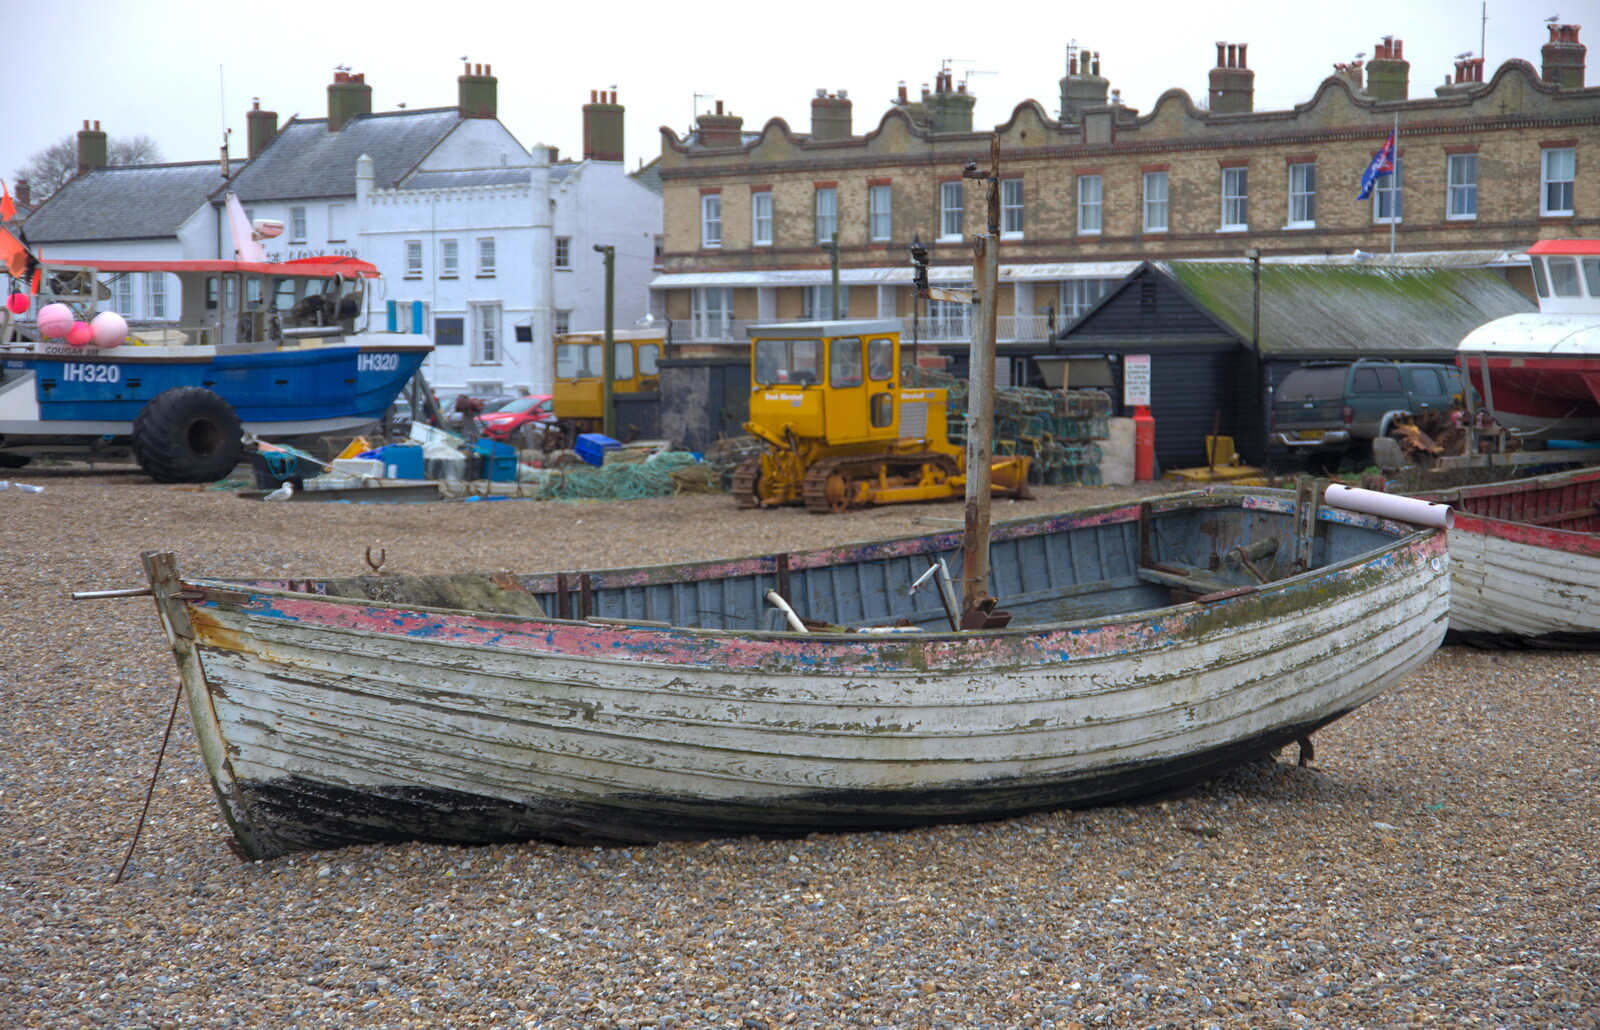 A derelict fishing boat from A Postcard from Aldeburgh, Suffolk - 6th January 2019